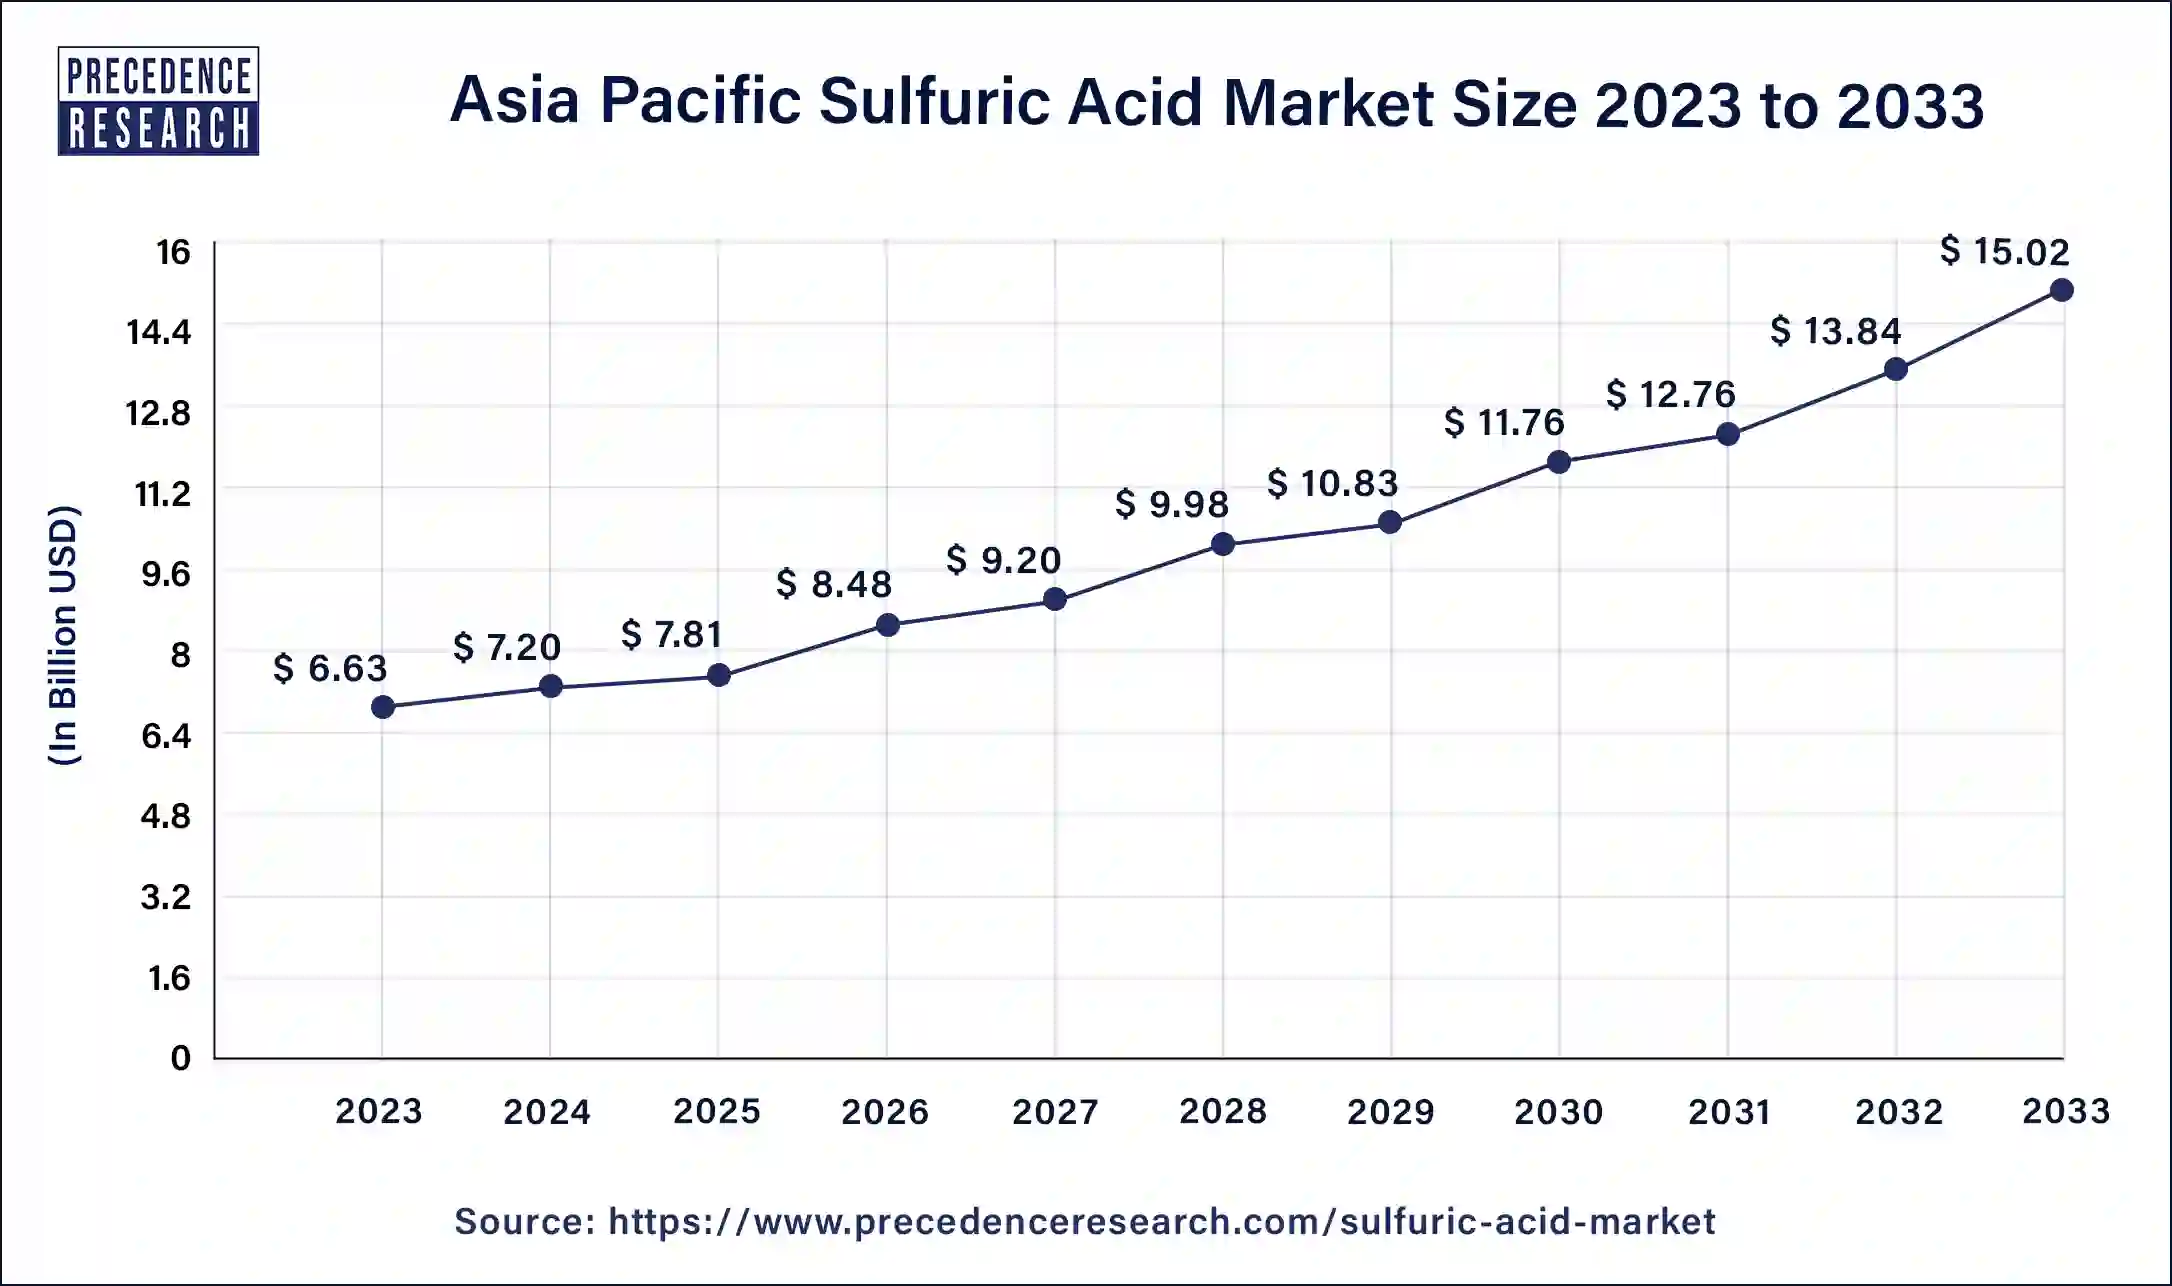 Asia Pacific Sulfuric Acid Market Size 2024 to 2033